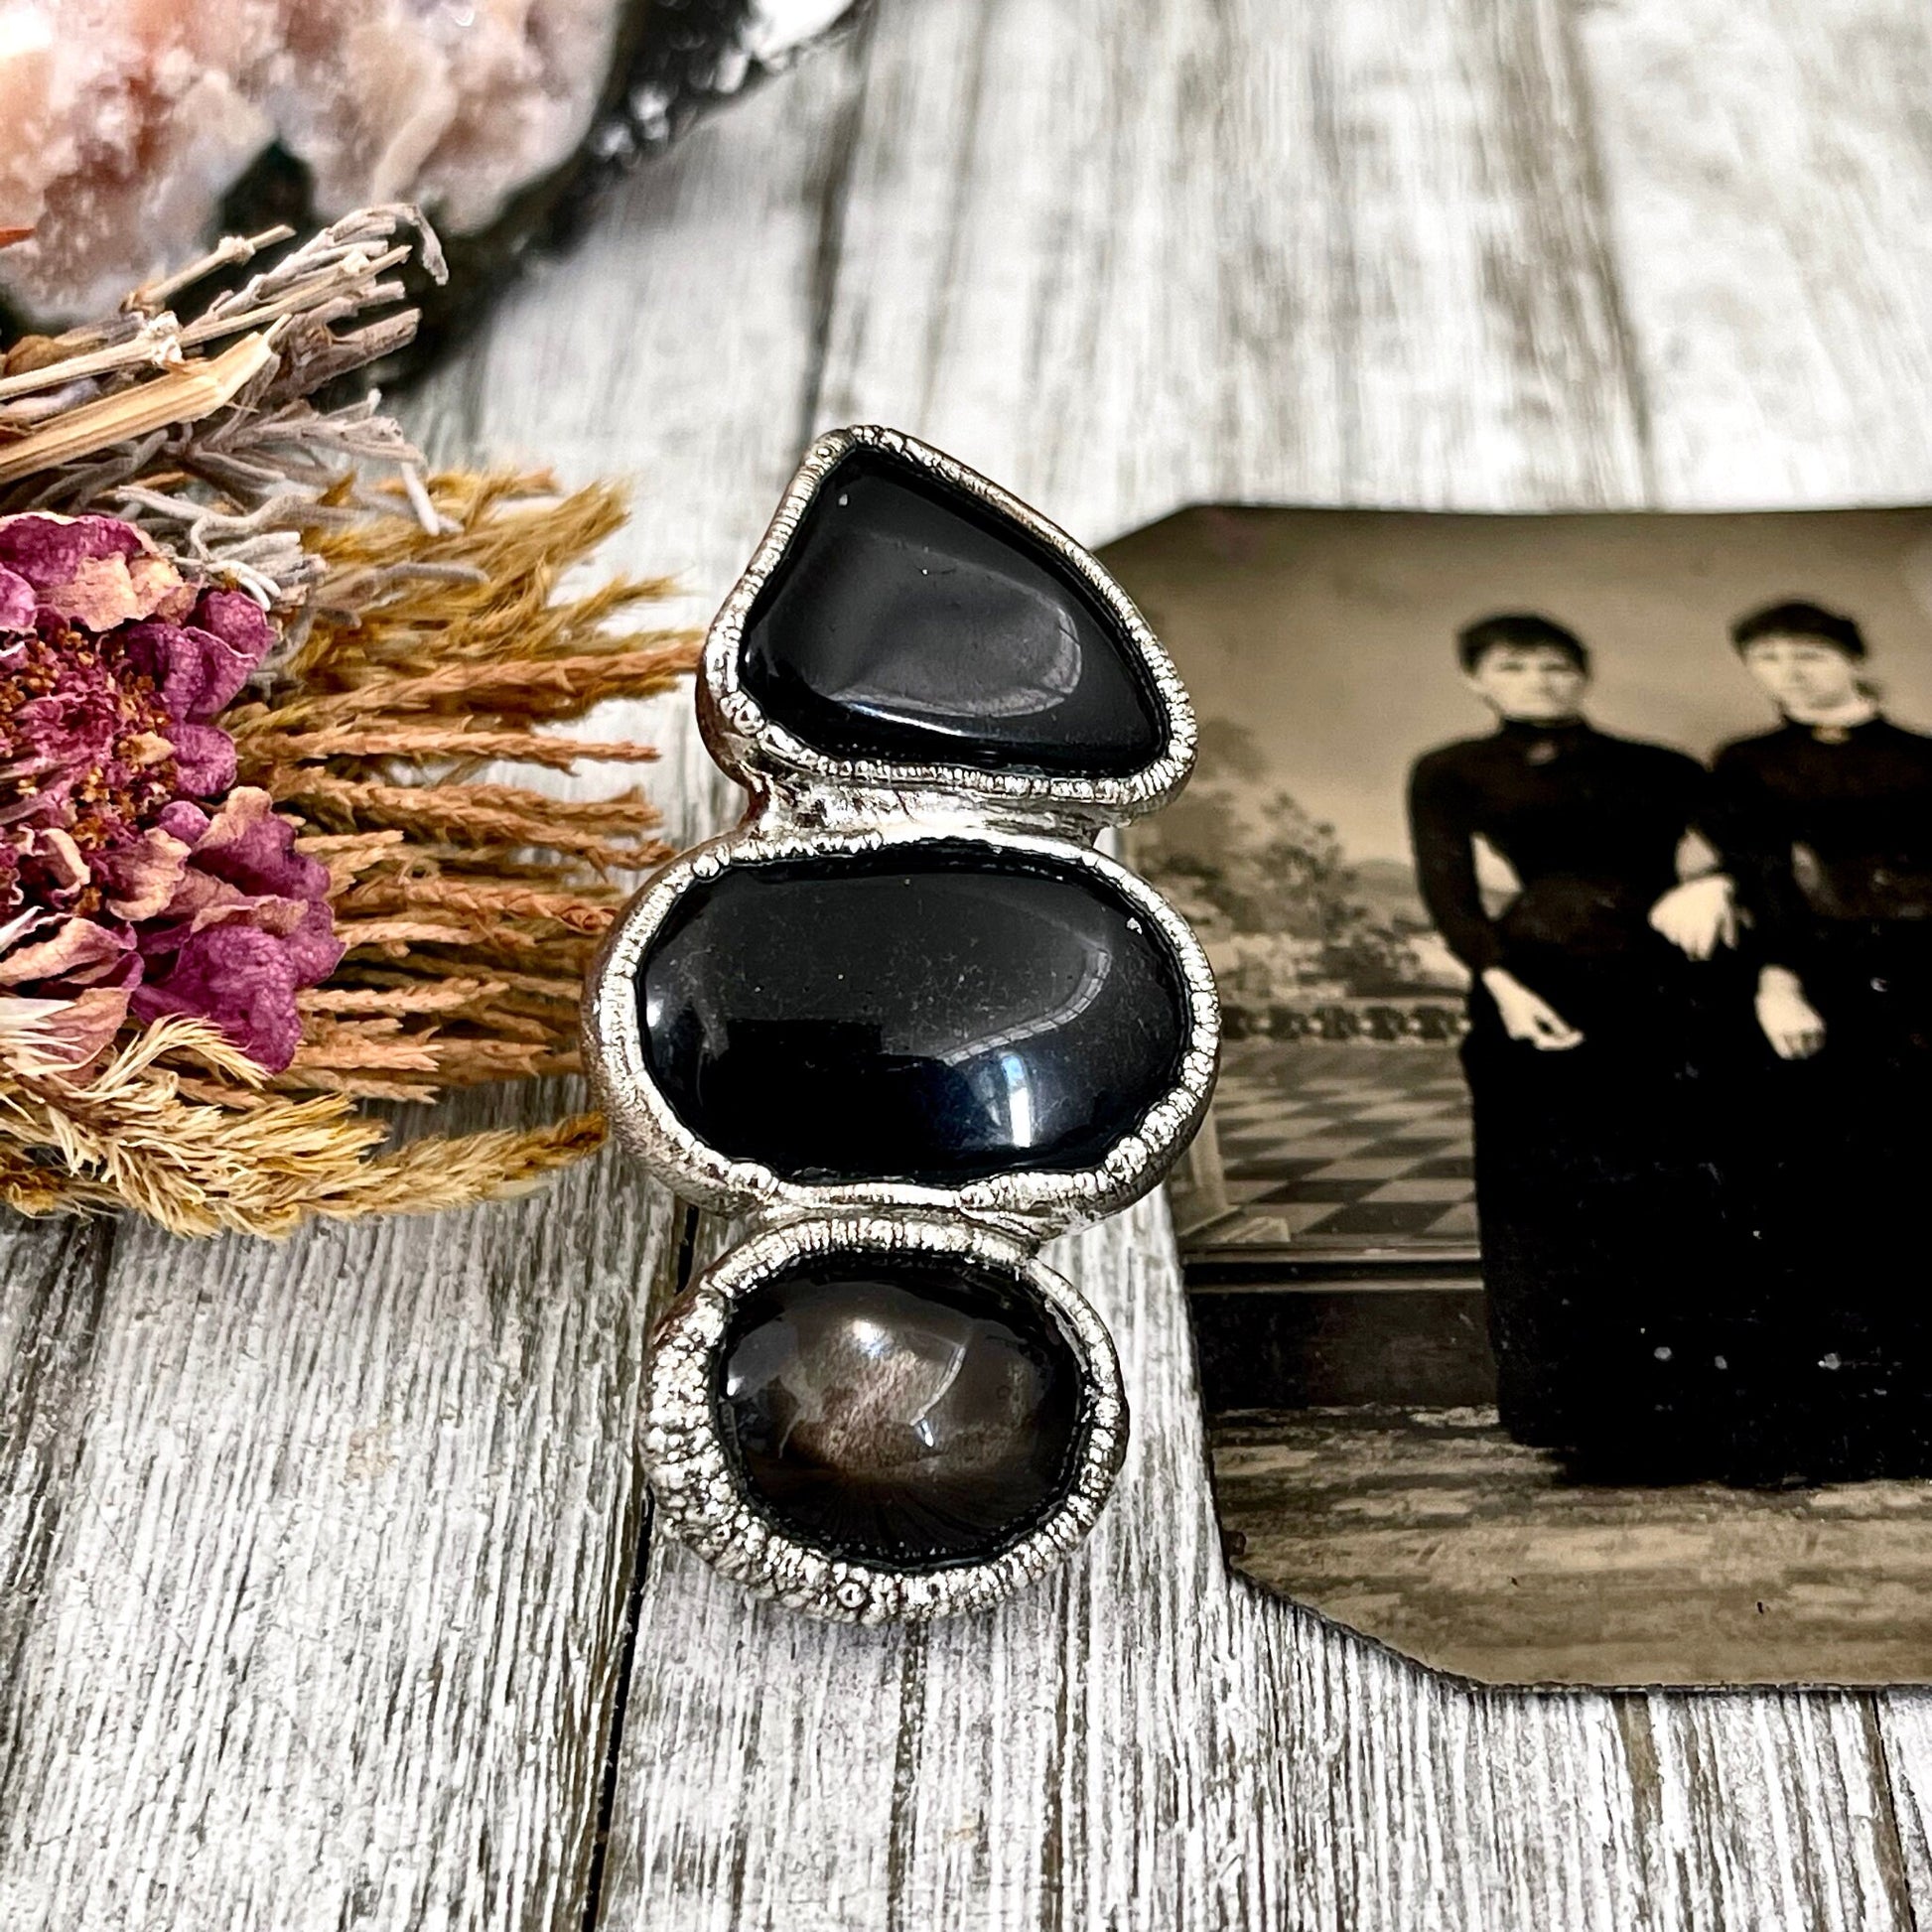 Size 7.5 Crystal Ring - Three Stone Black Onyx Black Star Sunstone Ring in Silver / Foxlark Collection - One of a Kind / Gothic Jewelry